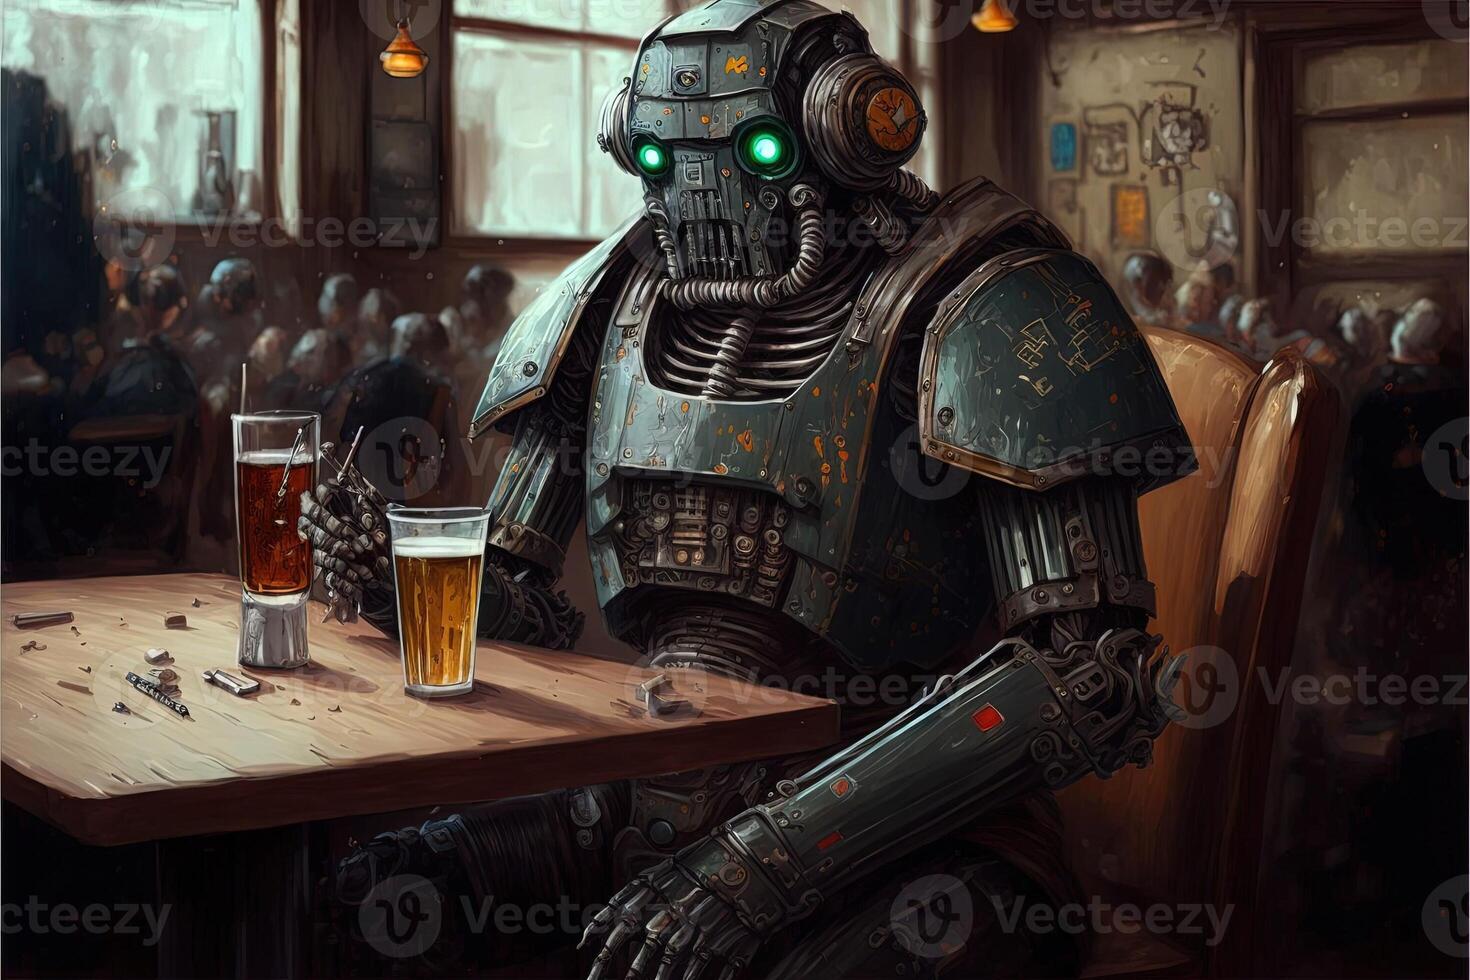 Robot drinking a beer in a bar illustration photo